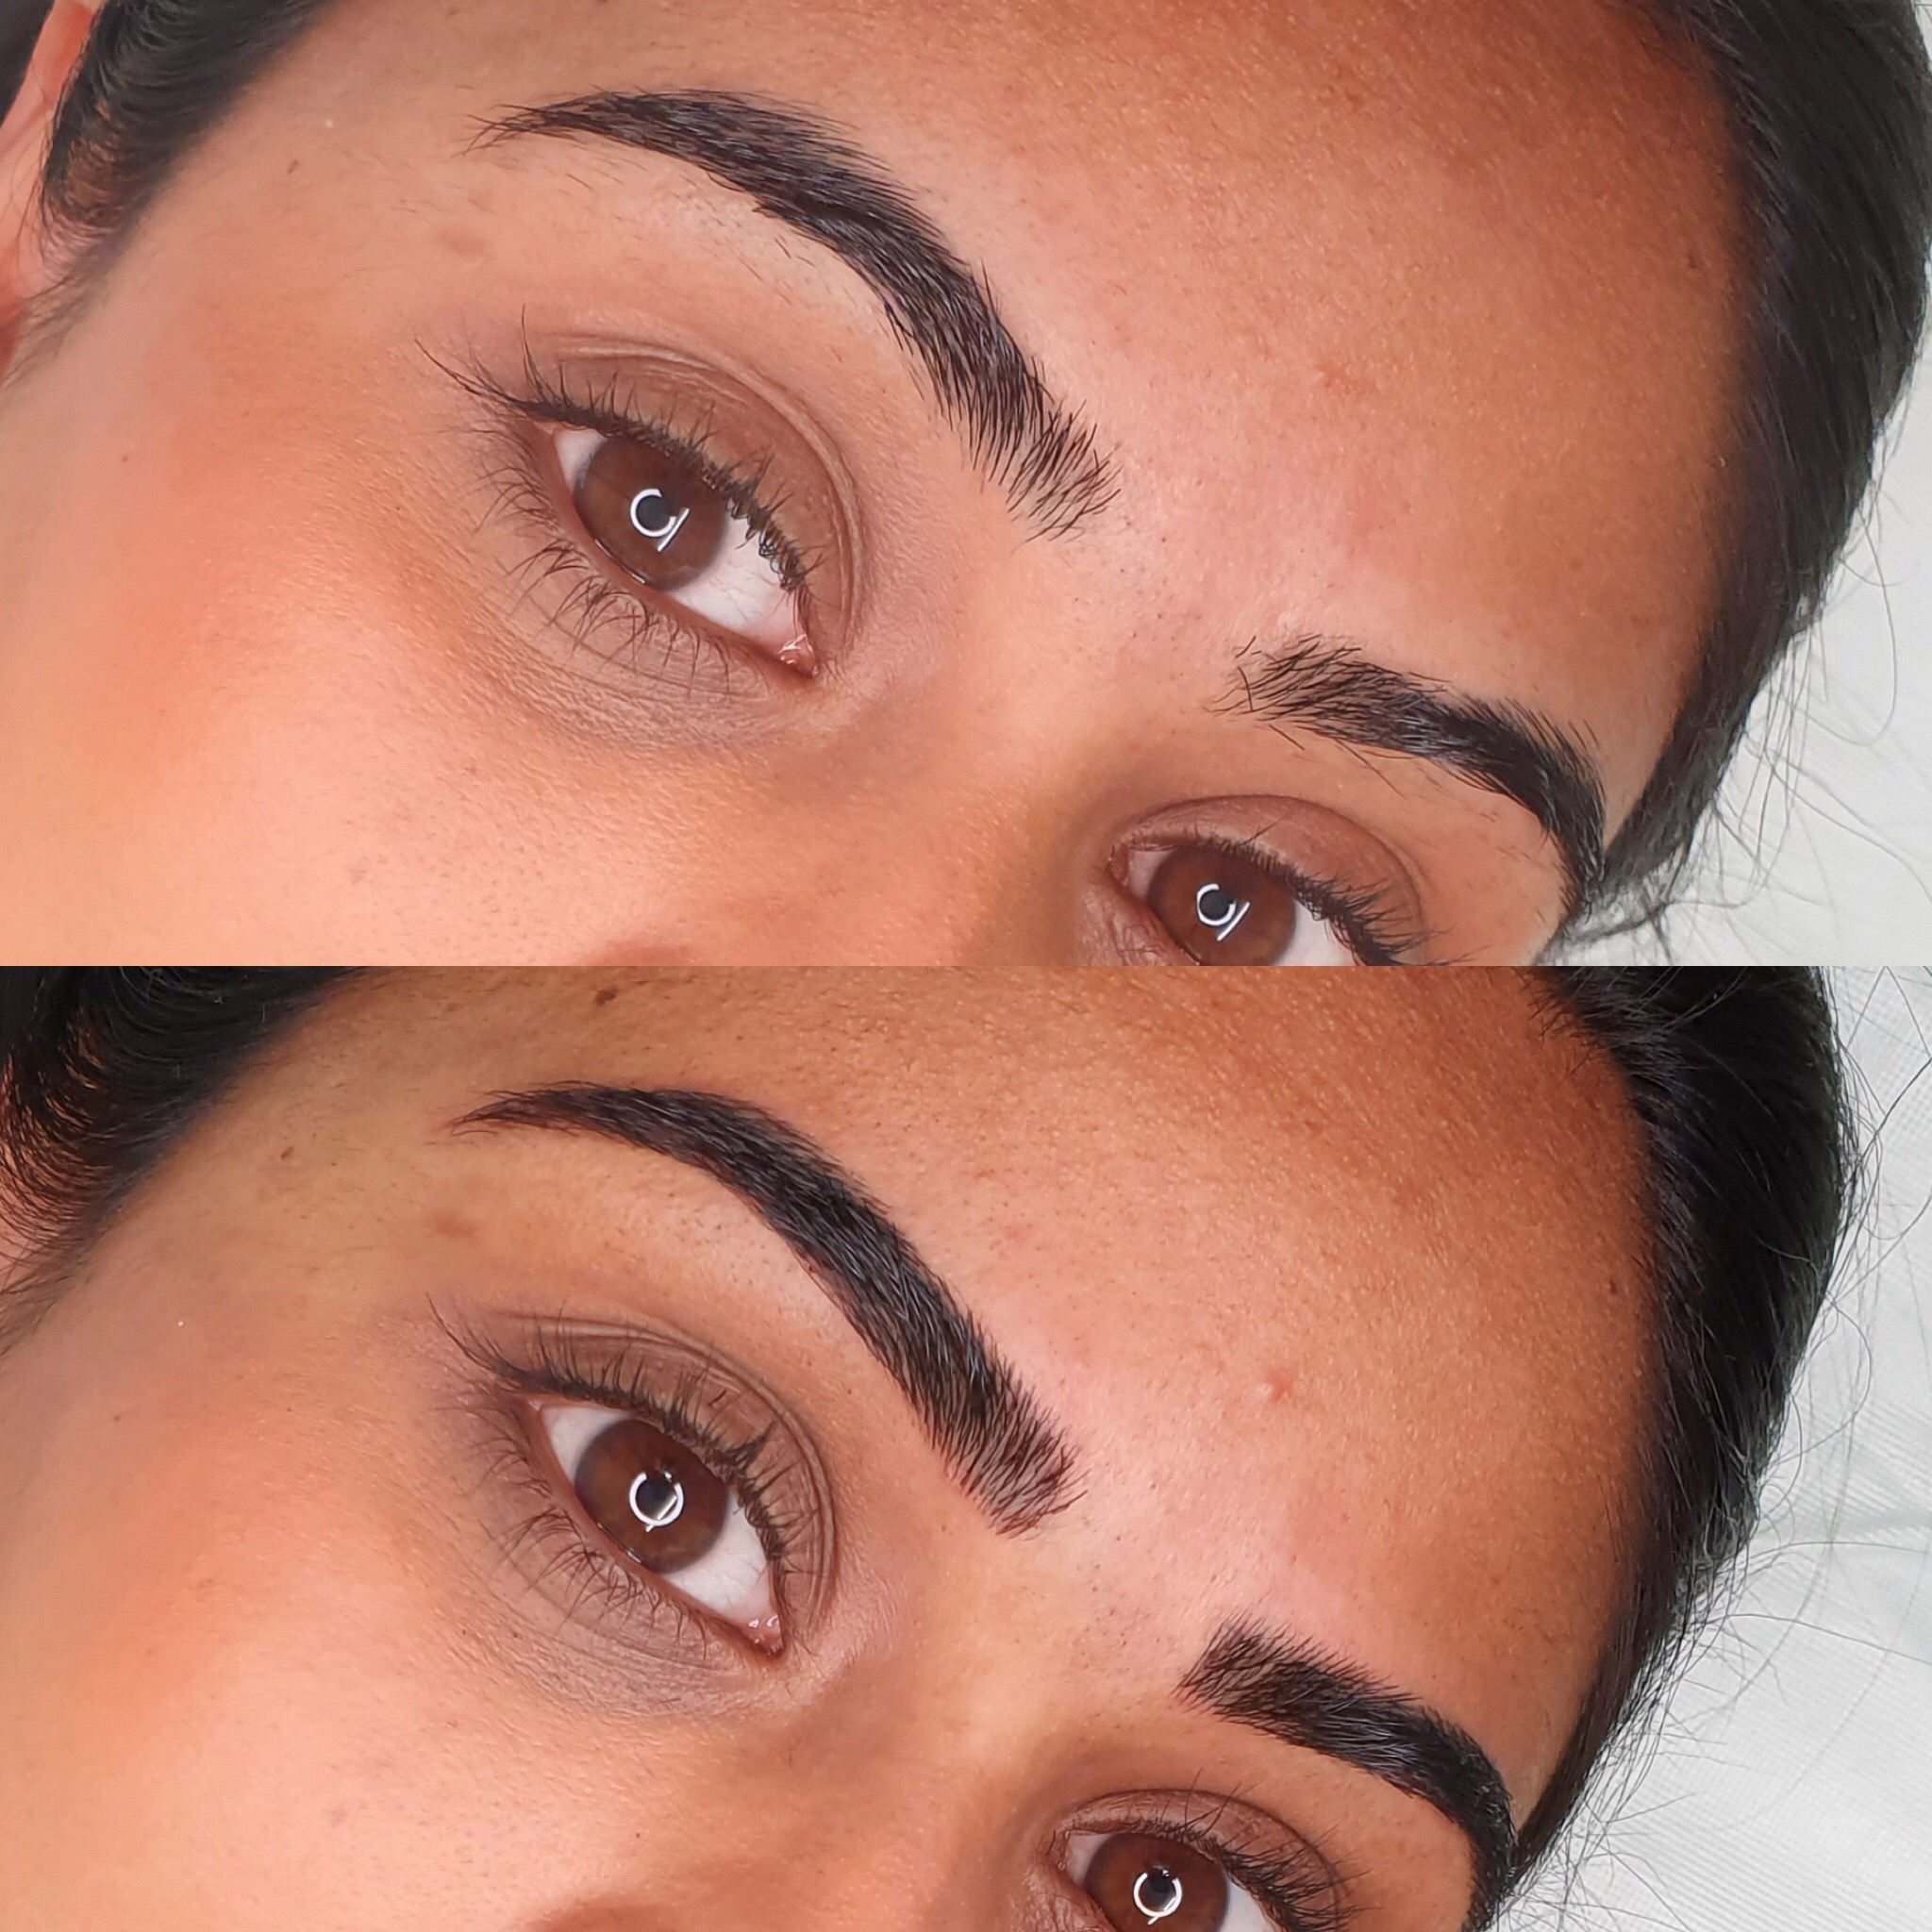 Before and after pictures of the brow service provided by Brau.